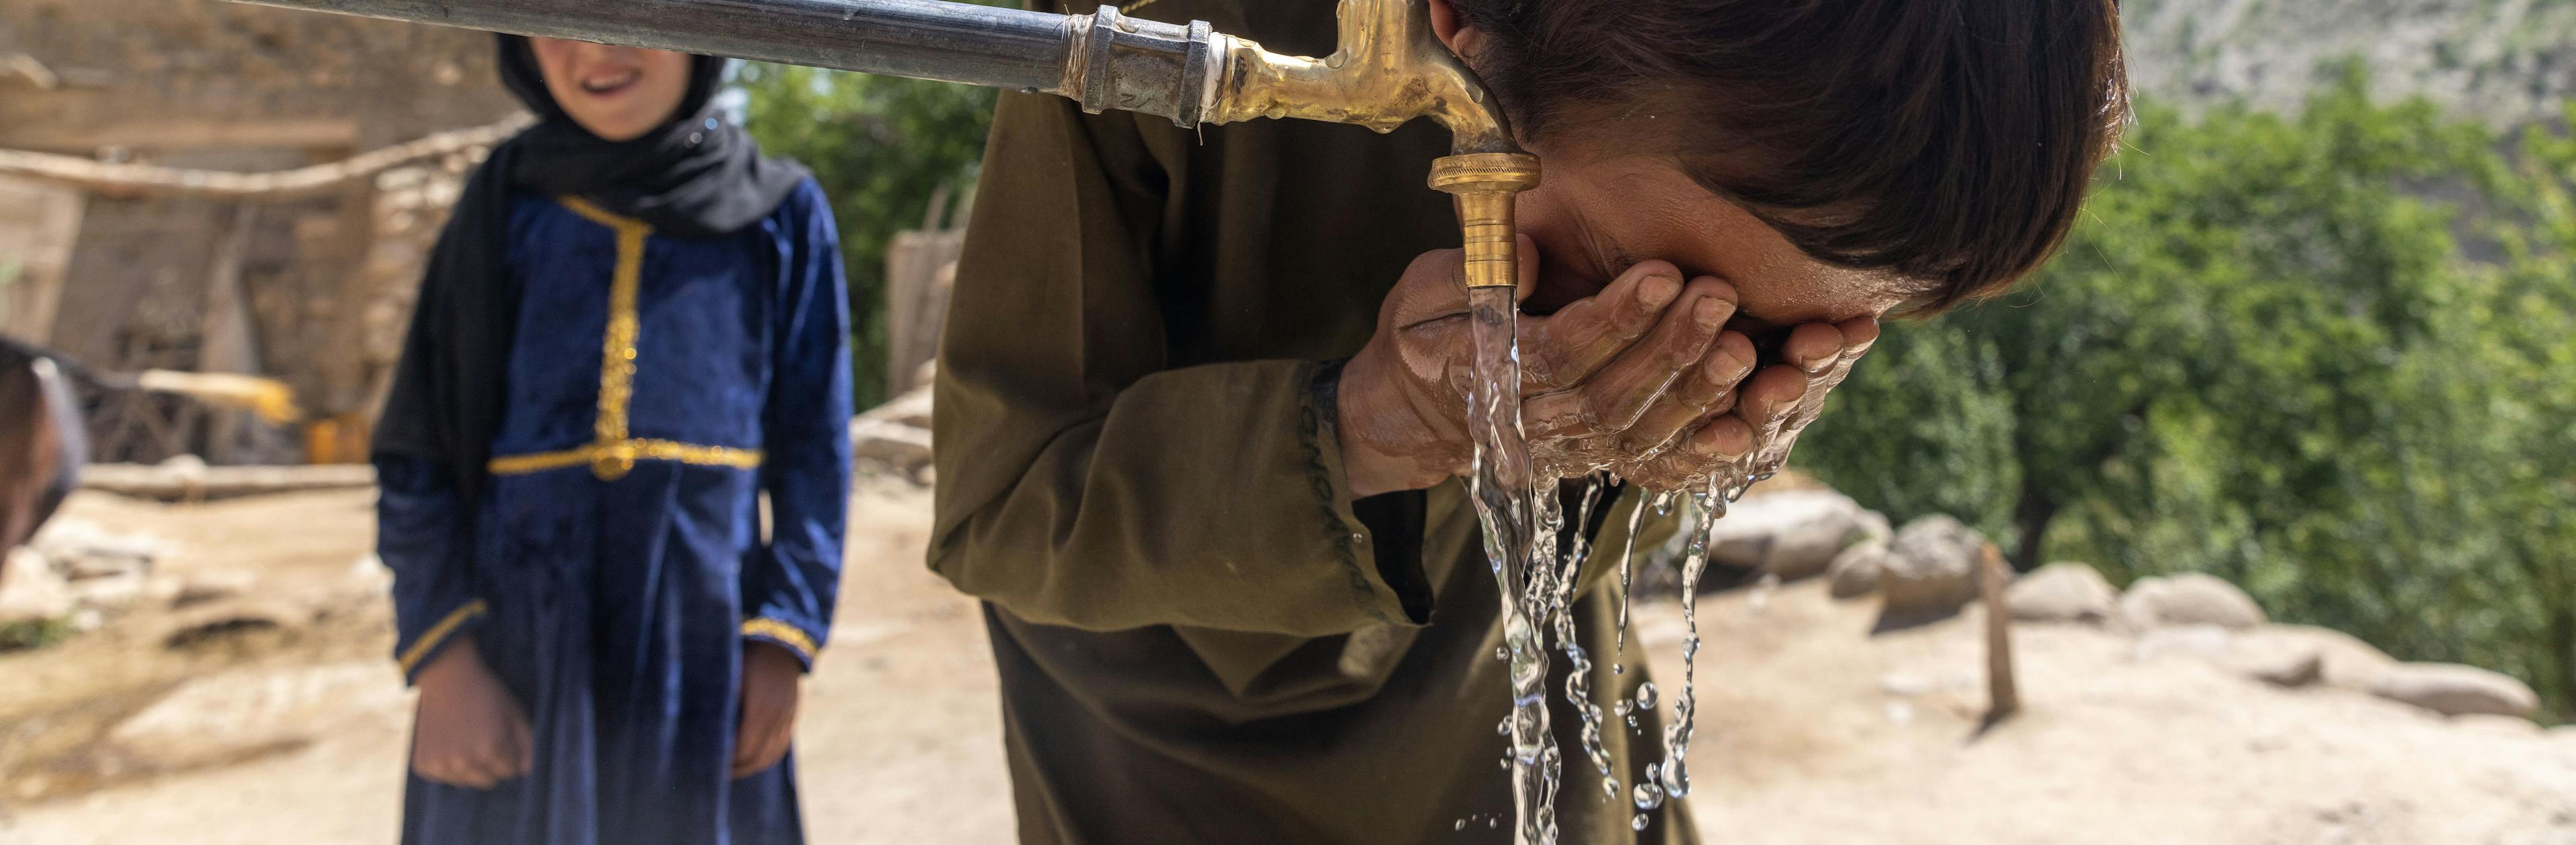 A young boy washing his face with clean water from a tap